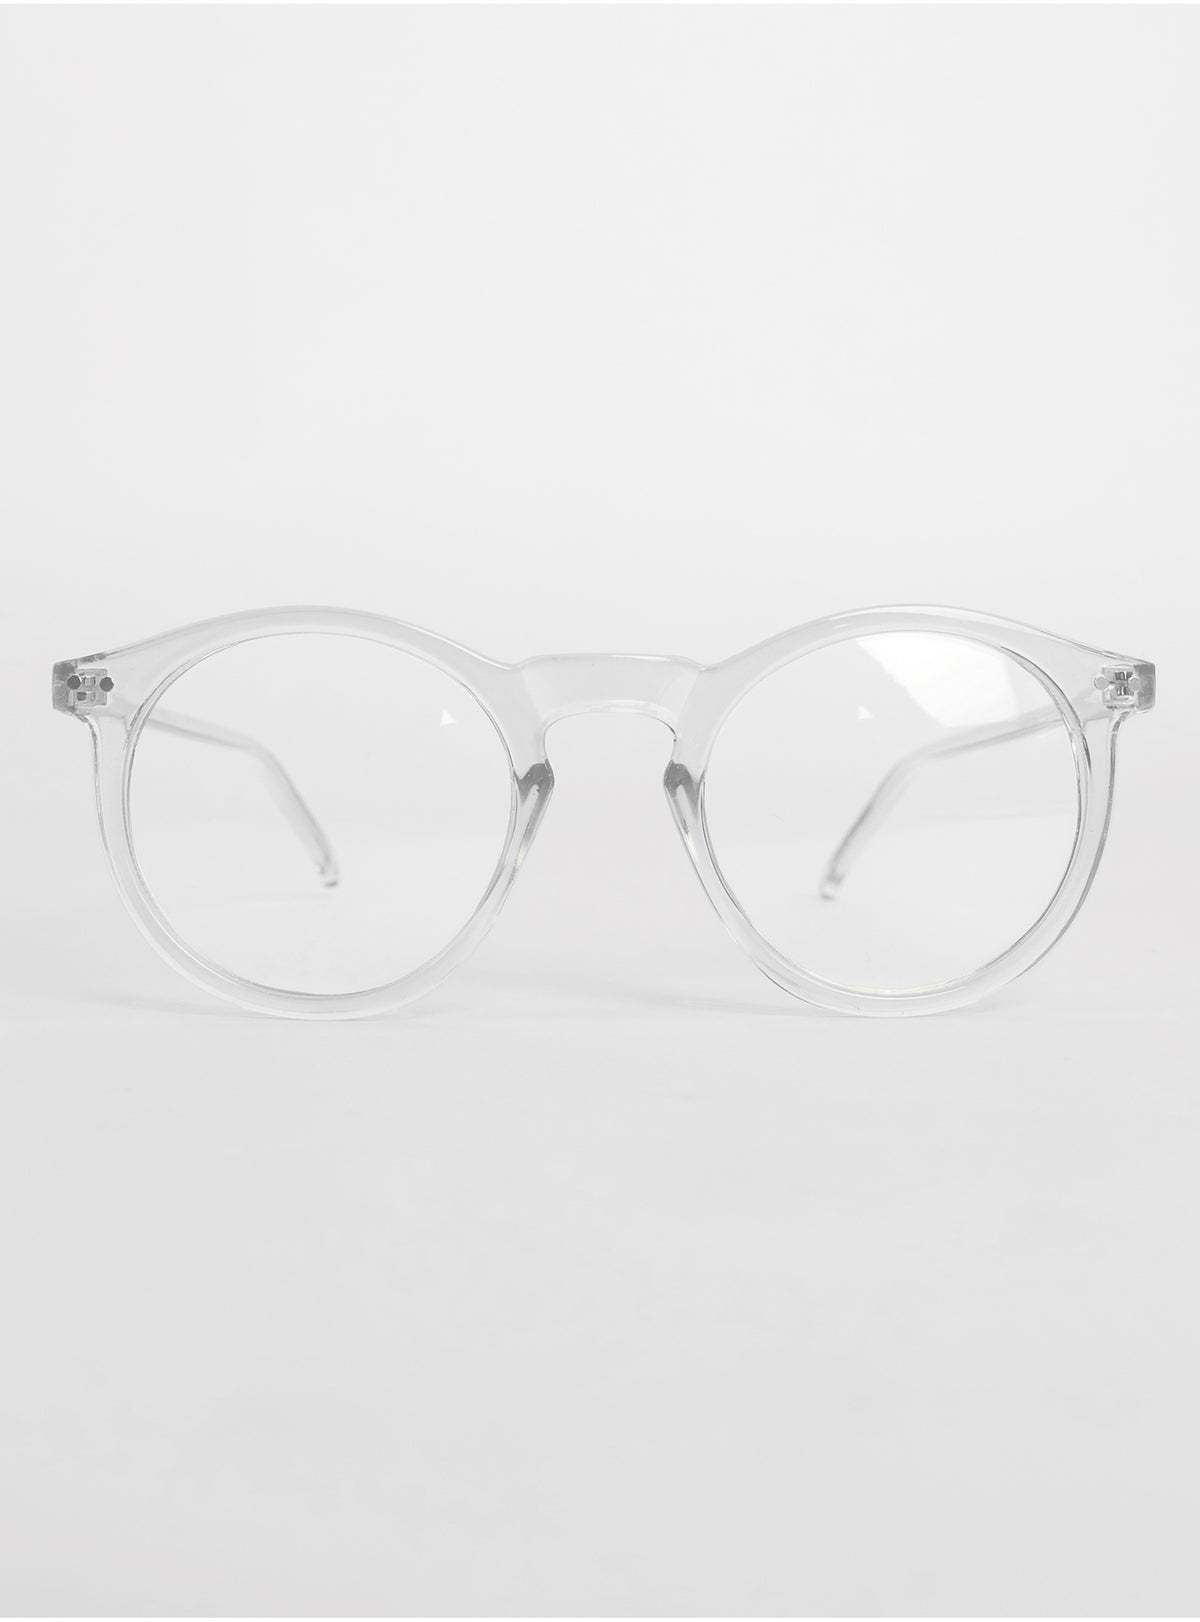 The Tycho Glasses